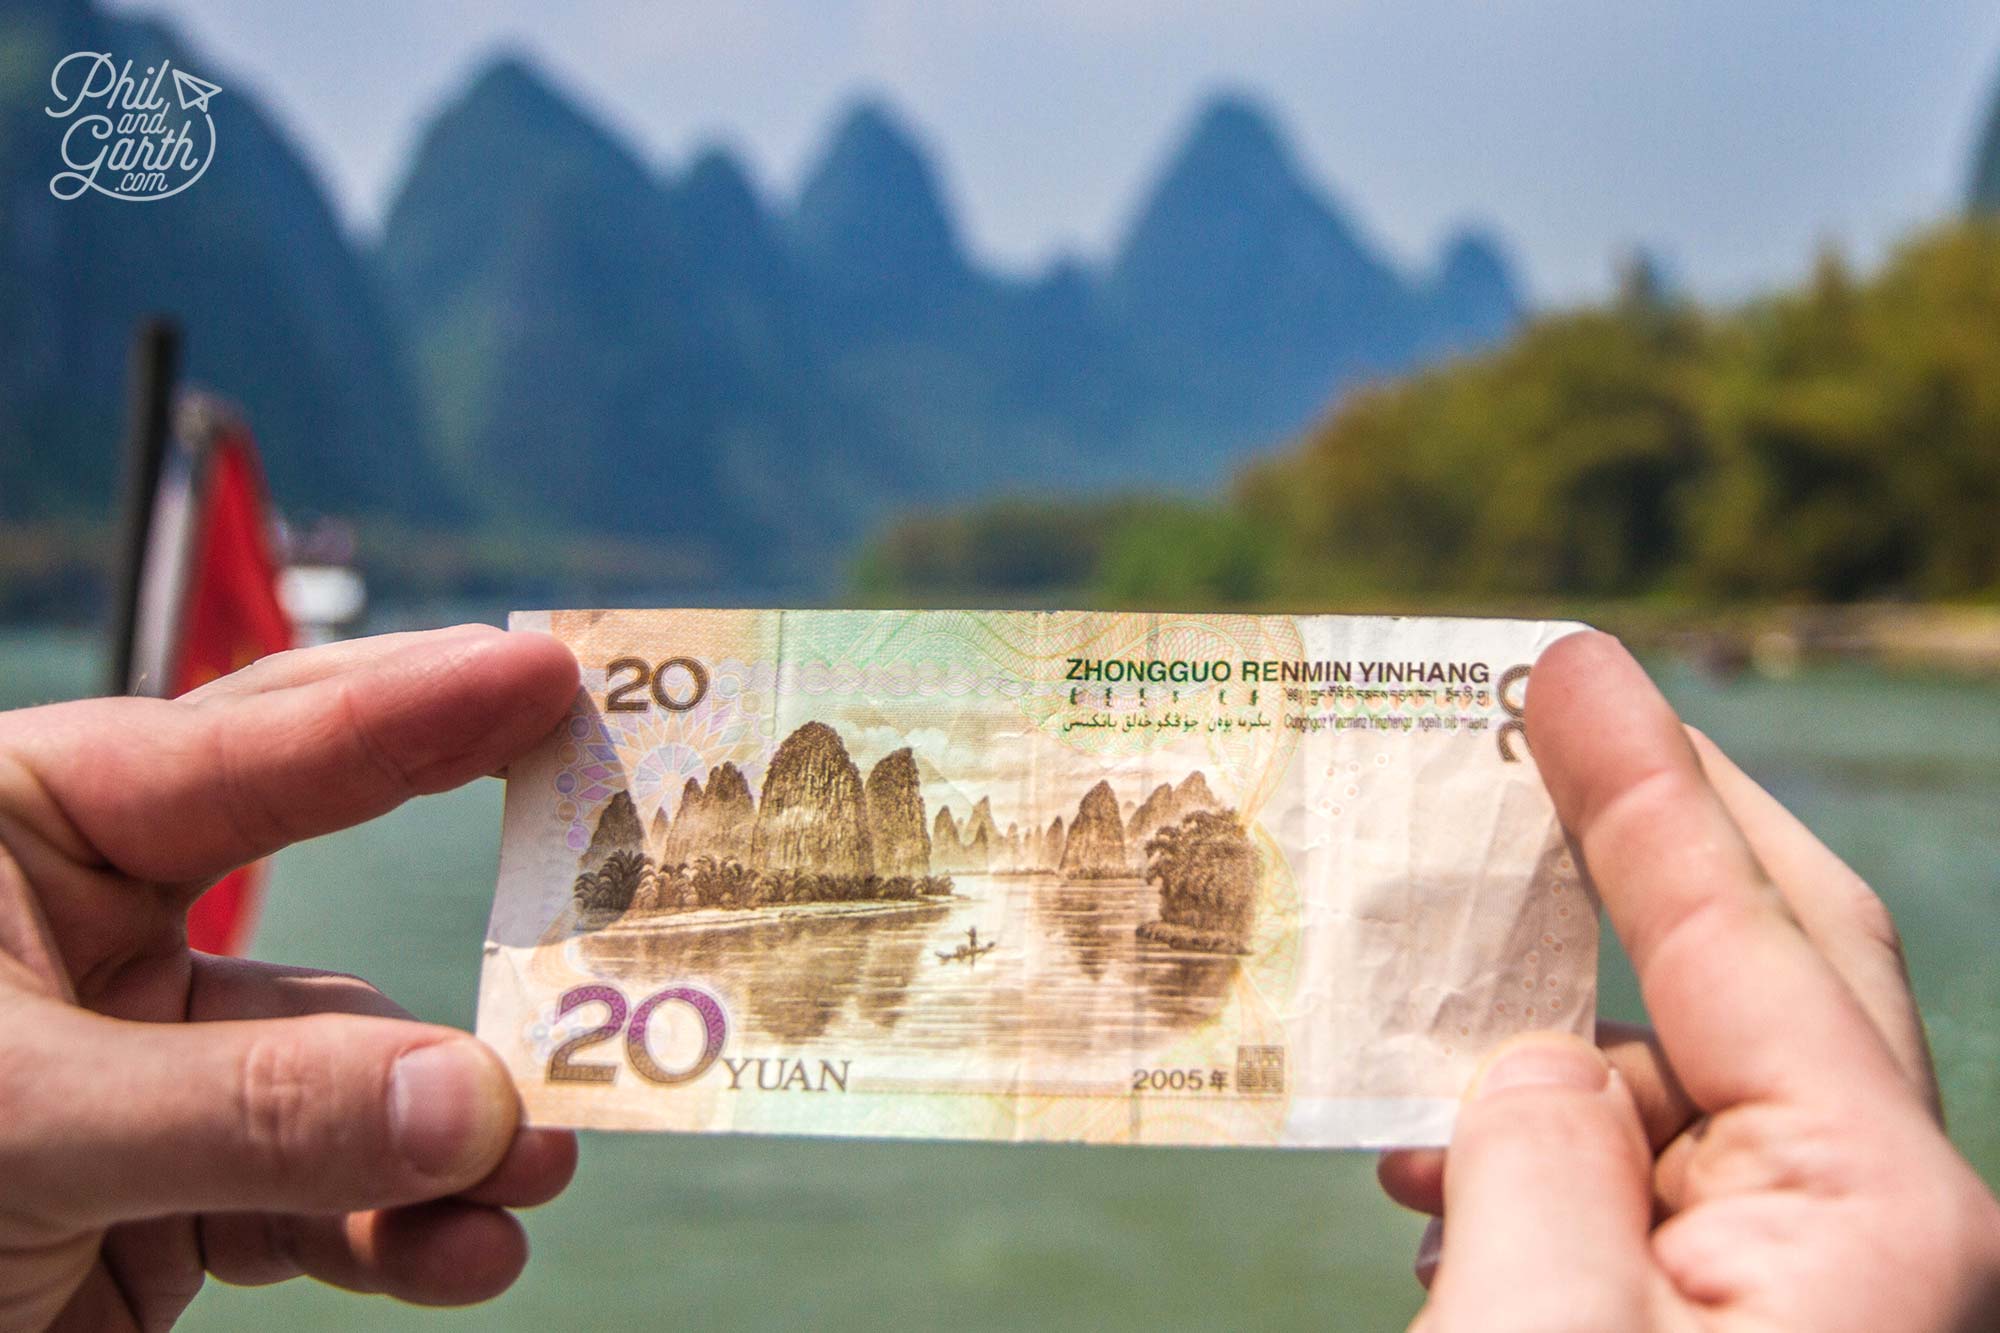 The Li River illustration on the back of the 20 Yuan note